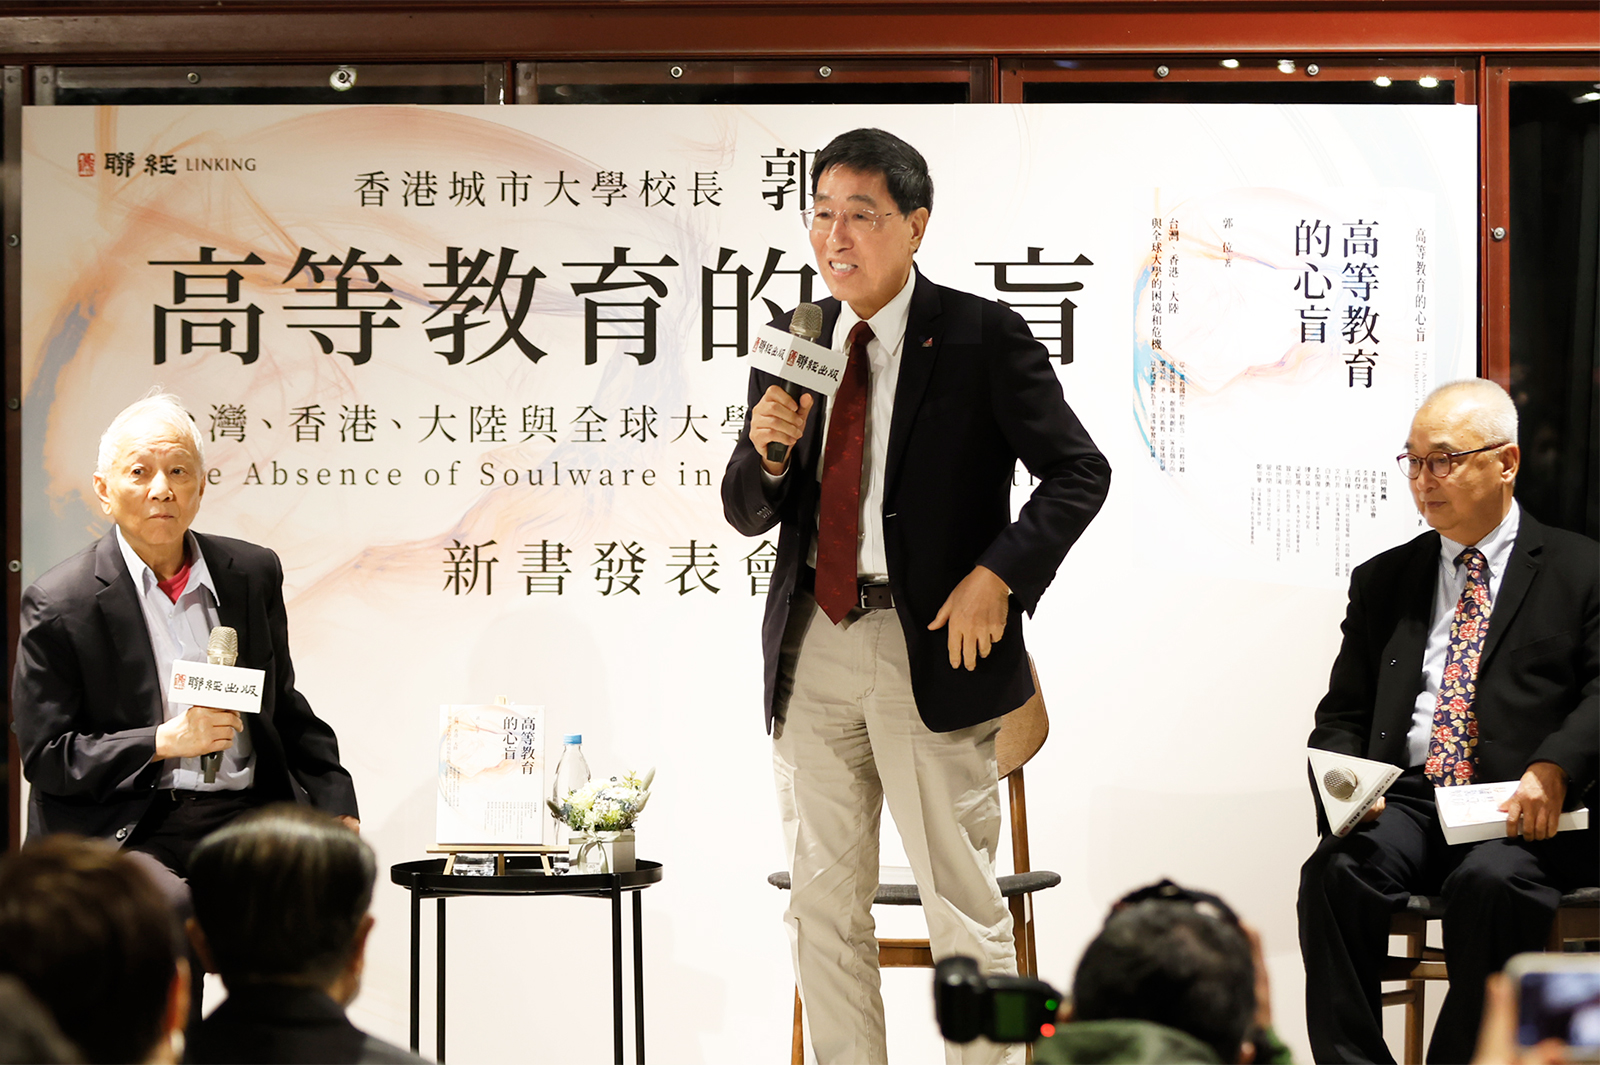 President Kuo exchanged views with the attendees about his new book. On his right was Professor Tzeng, and on his left was Mr Linden Lin, Publisher of Linking Publishing Co Ltd.